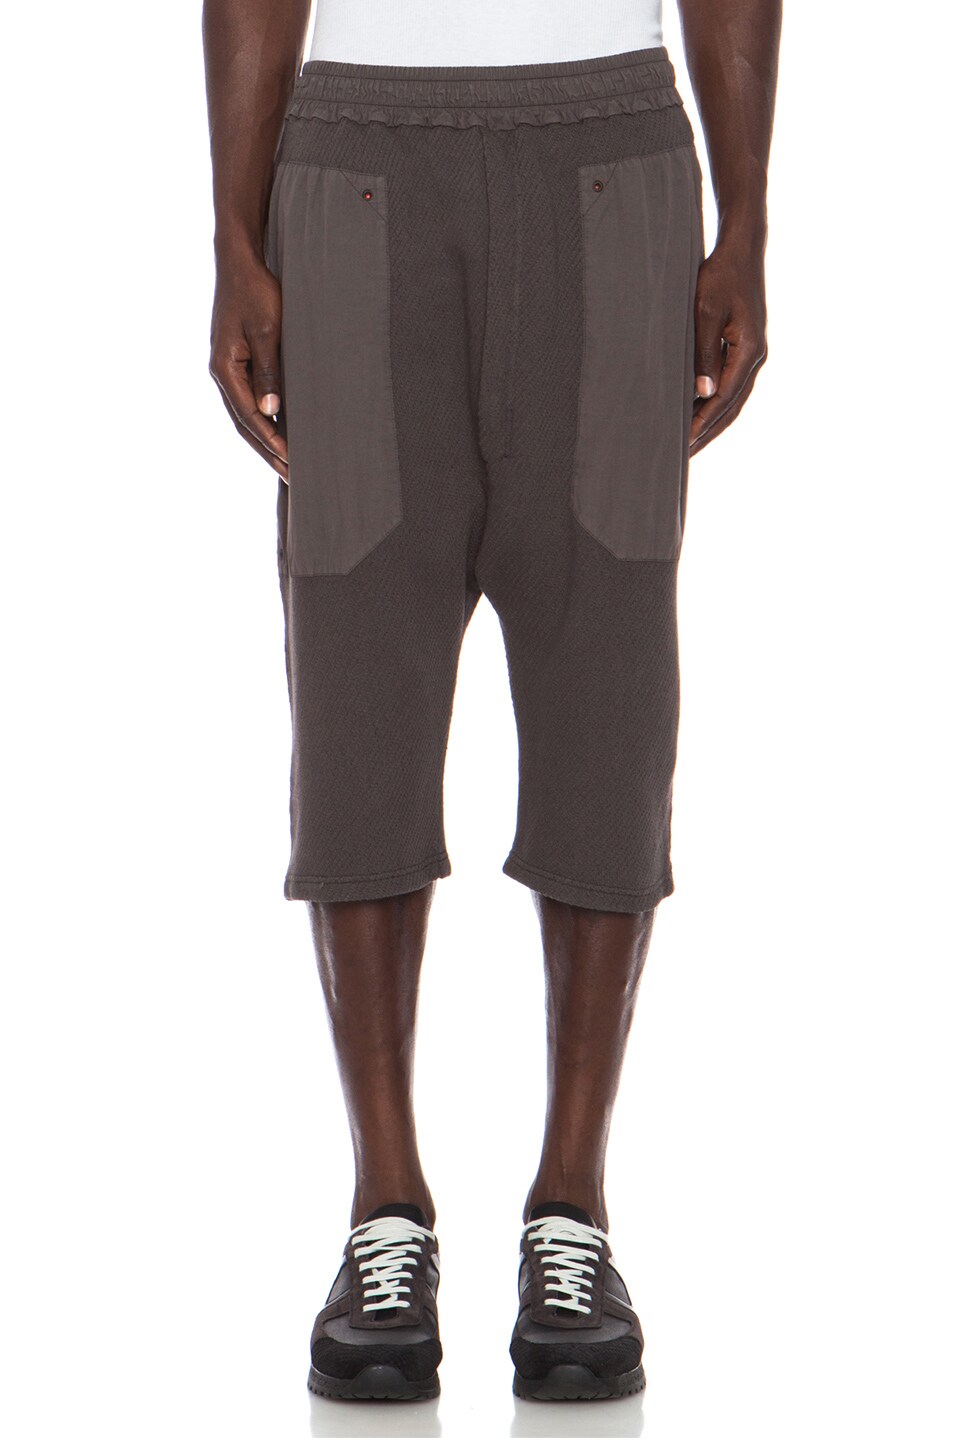 Image 1 of SILENT DAMIR DOMA Plimm 3/4 Cotton-Blend Sweatpants in Ashes